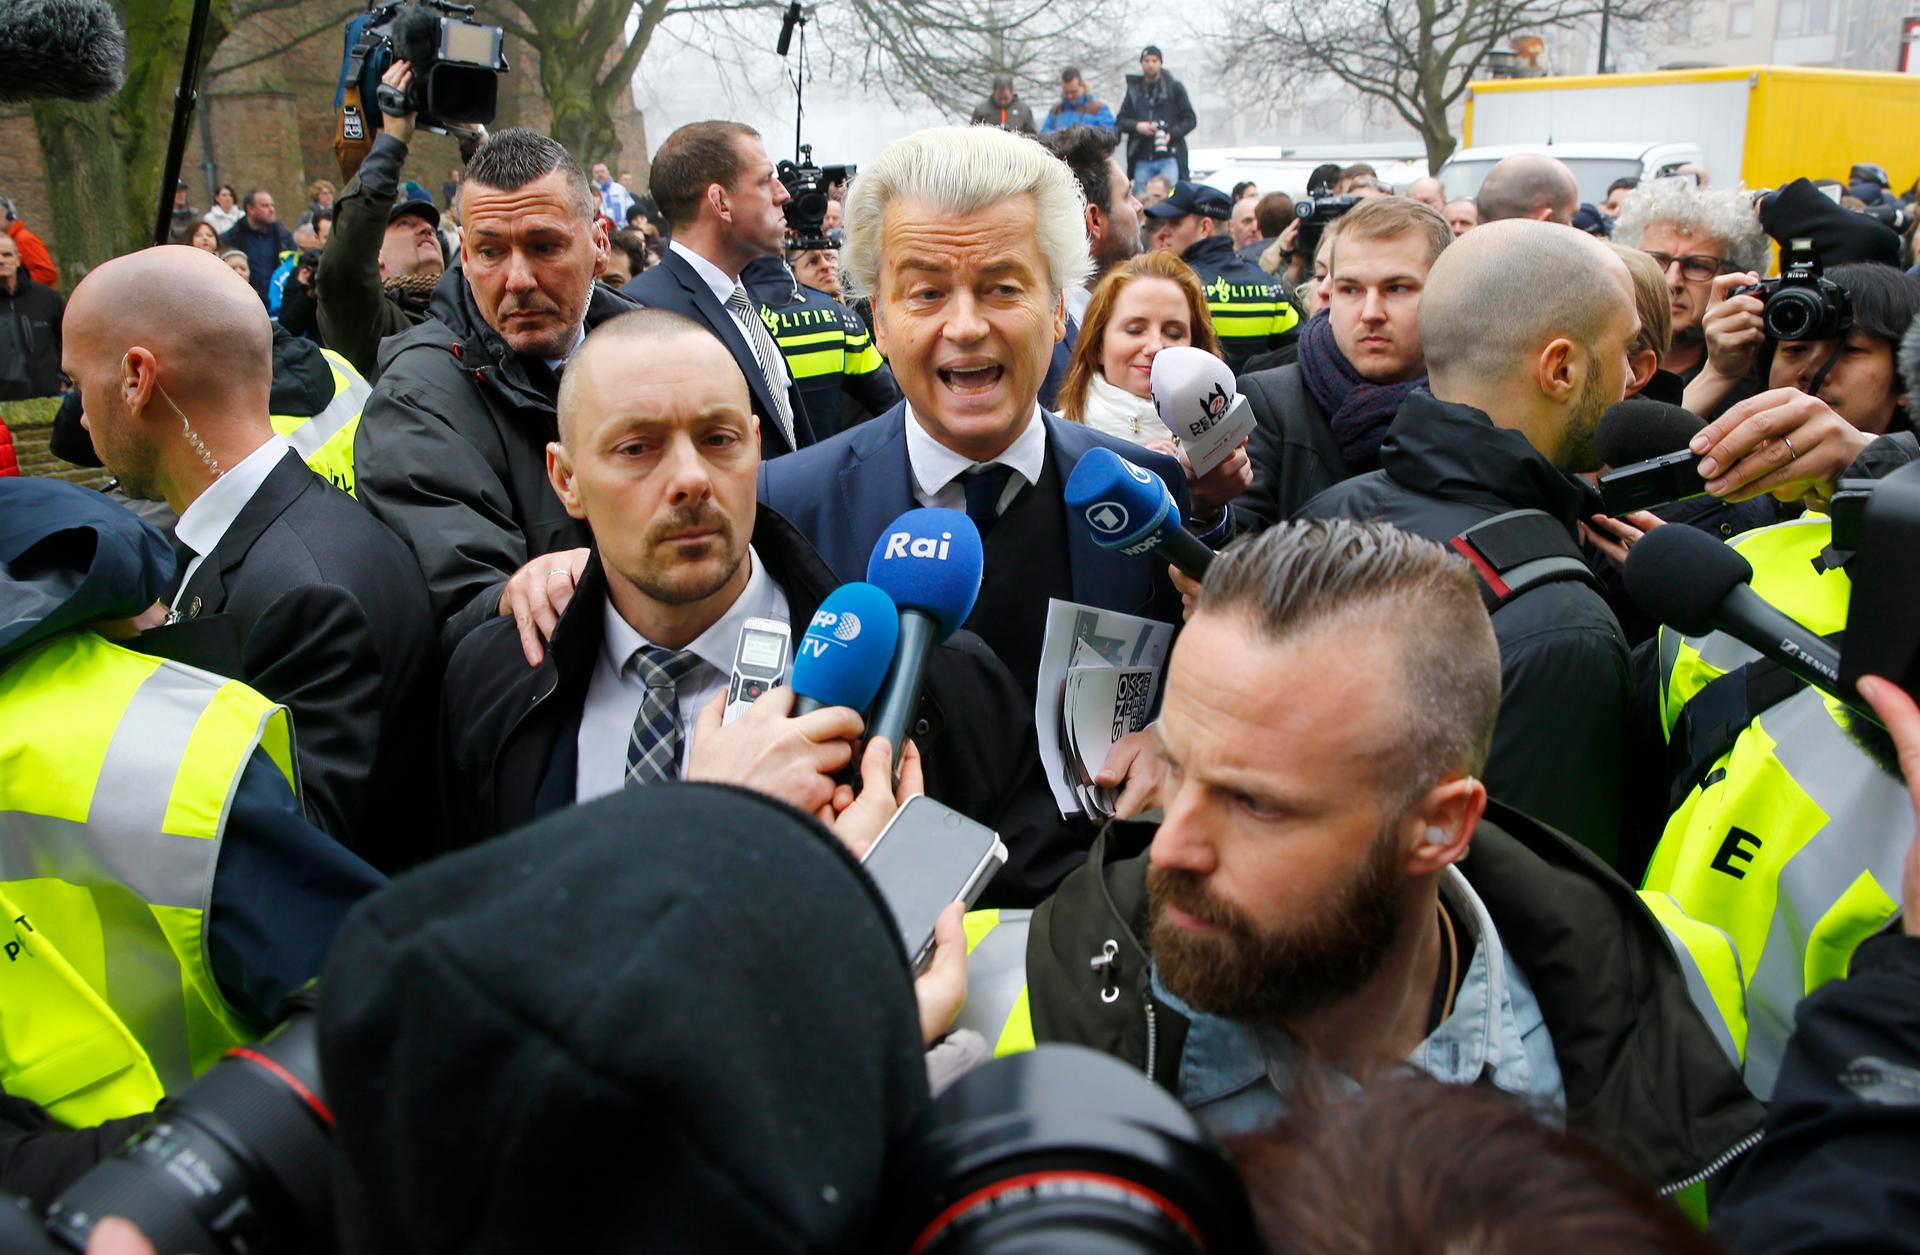 Dutch far-right Party for Freedom (PVV) leader Geert Wilders campaigns for the 2017 Dutch election in Spijkenisse, a suburb of Rotterdam, on February 18. 